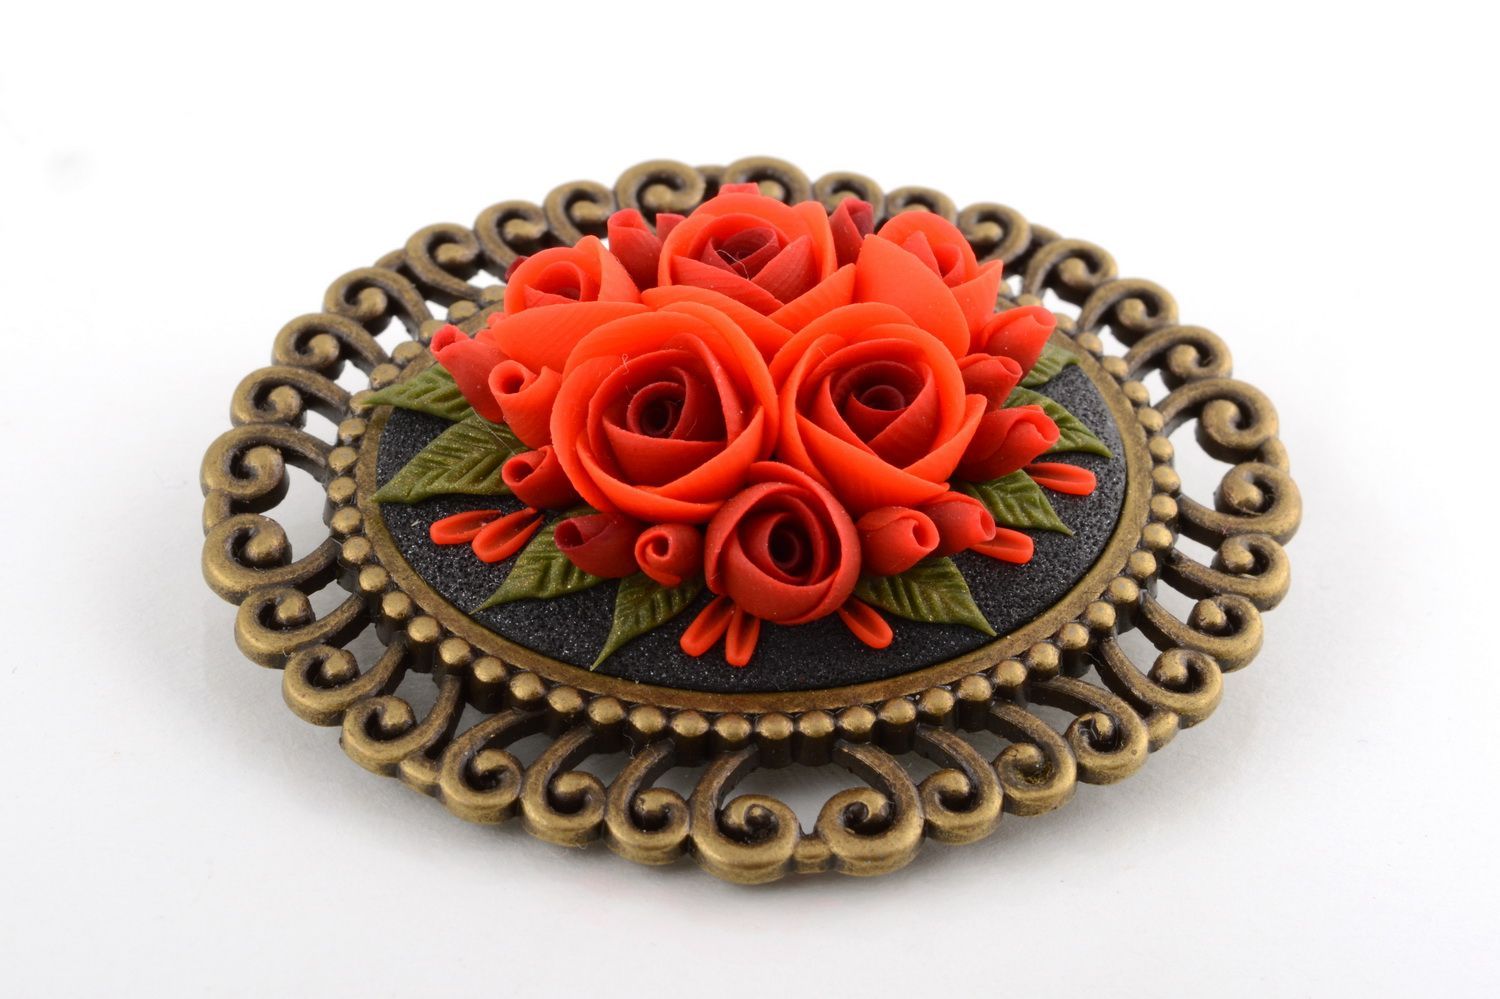 Handmade volume festive vintage brooch with cameo in shape of red roses photo 4